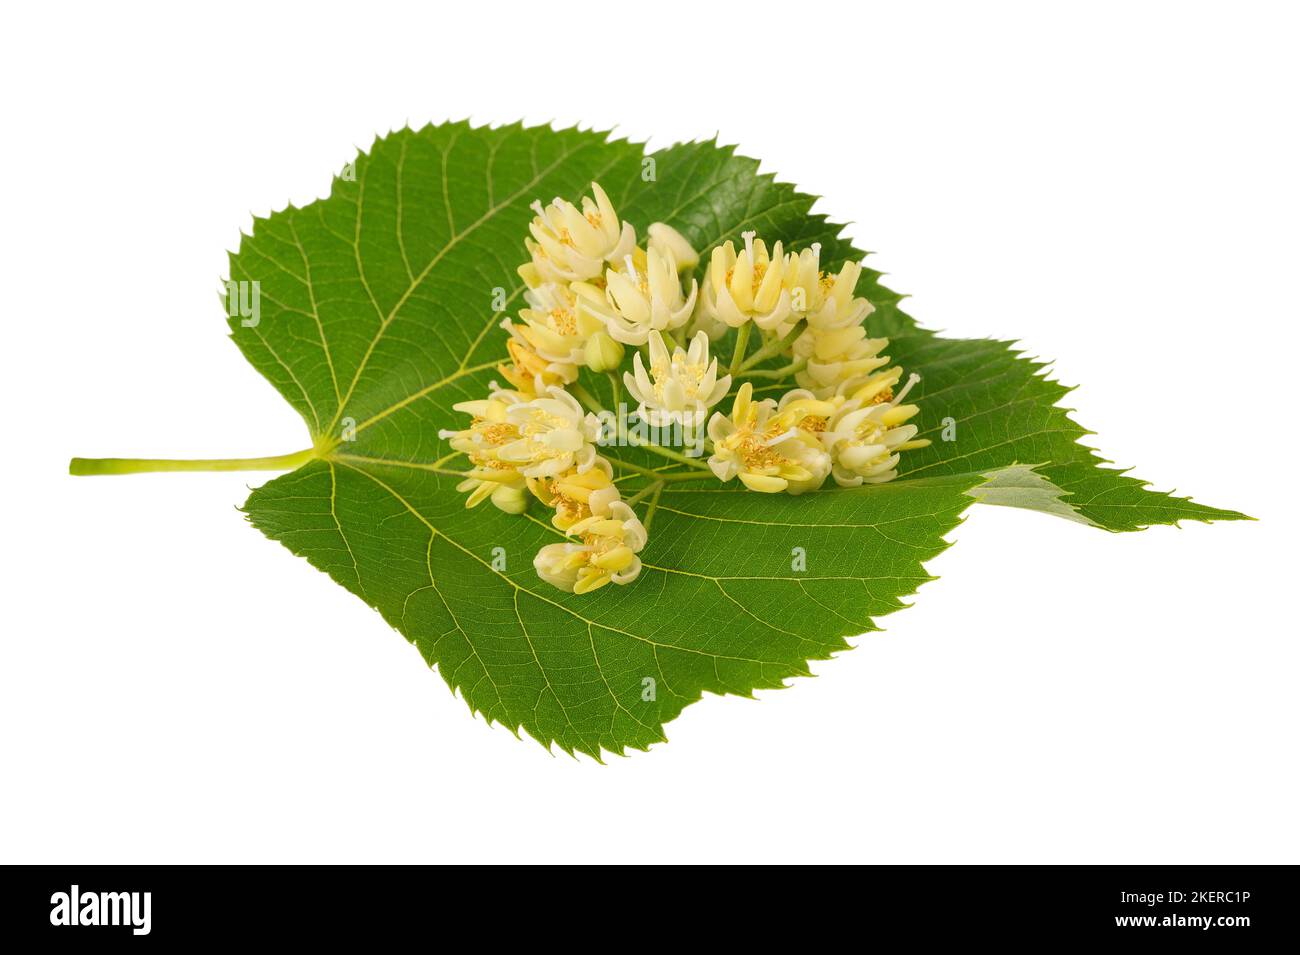 Linden leaf with flowers isolated on white Stock Photo